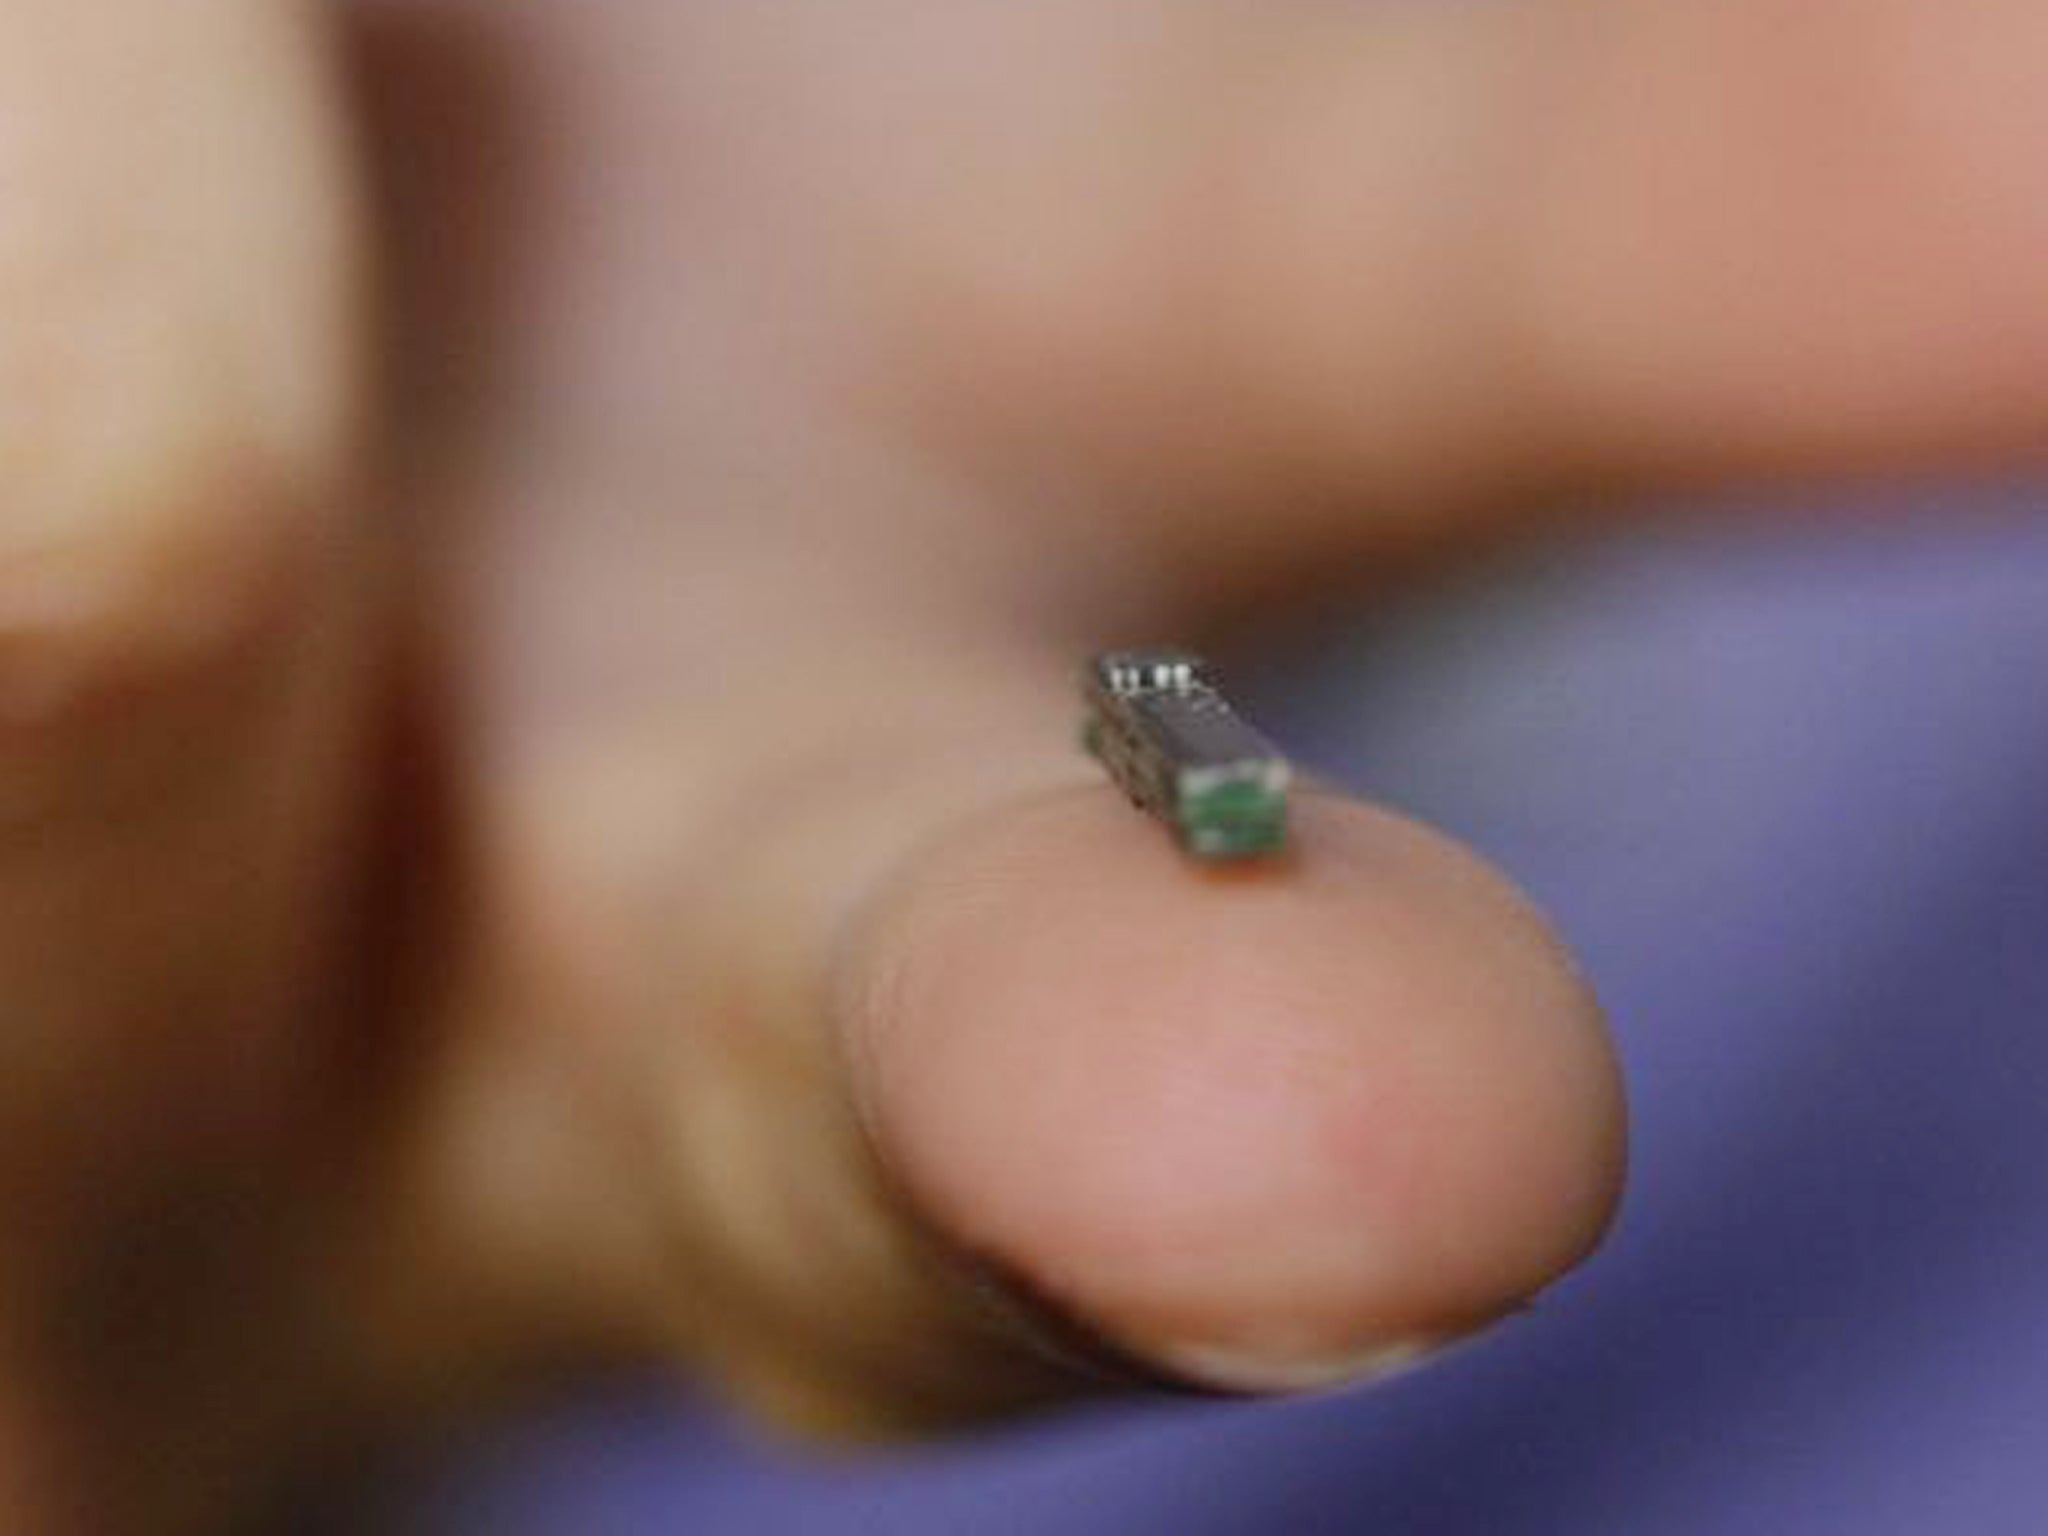 This tiny implant that conducts blood tests under the skin which could greatly improve the tracking and treatment of cancer and other diseases, say researchers